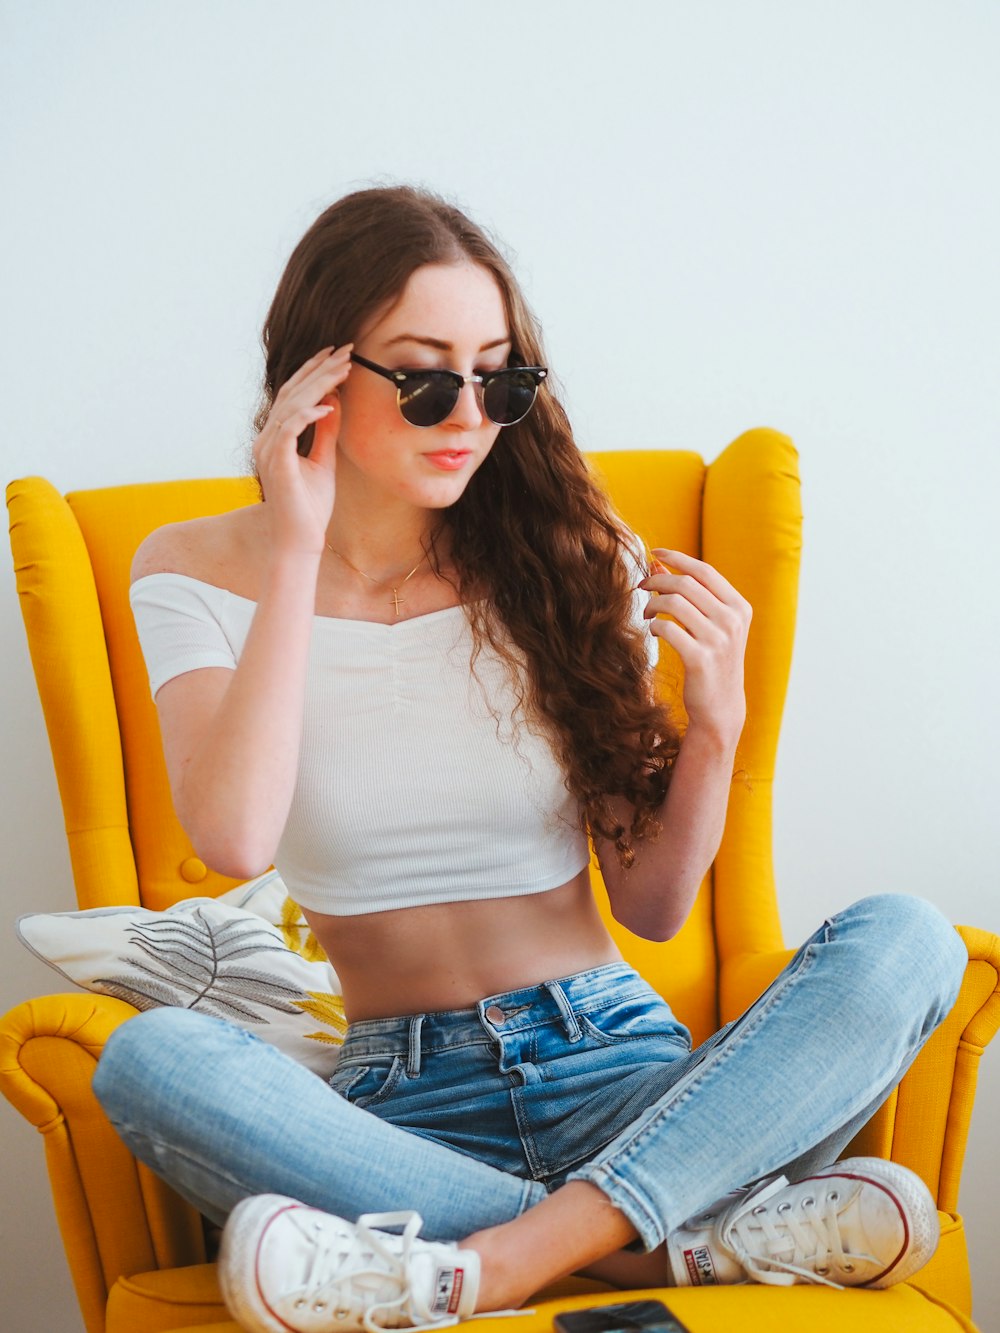 woman in white tank top and blue denim jeans wearing black sunglasses sitting on yellow leather